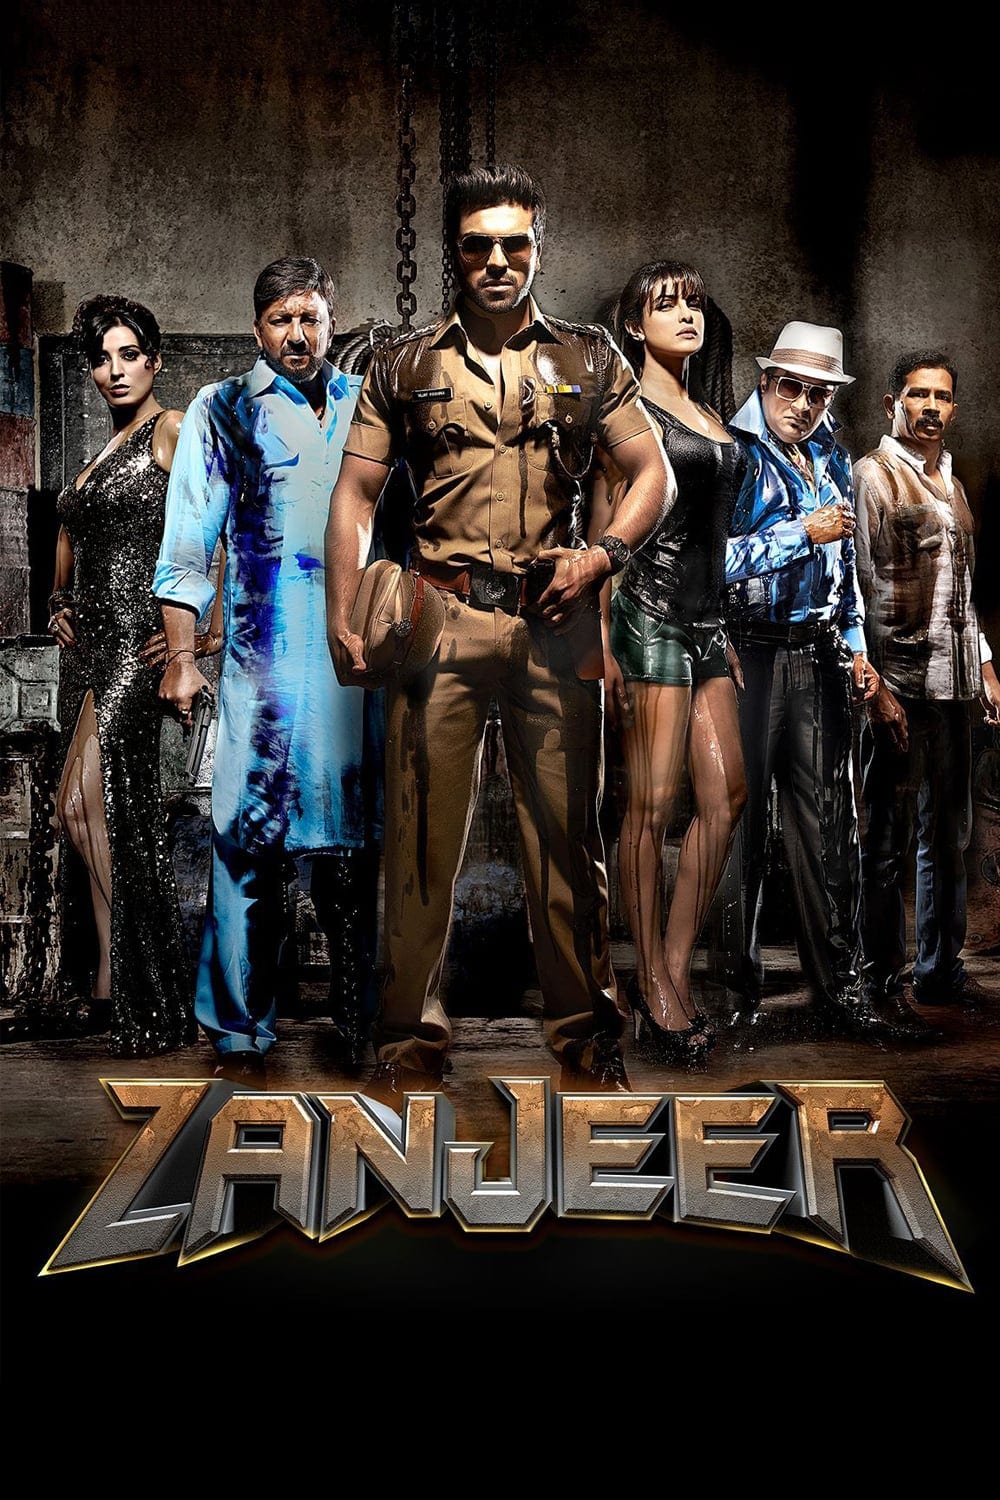 Poster for the movie "Zanjeer"